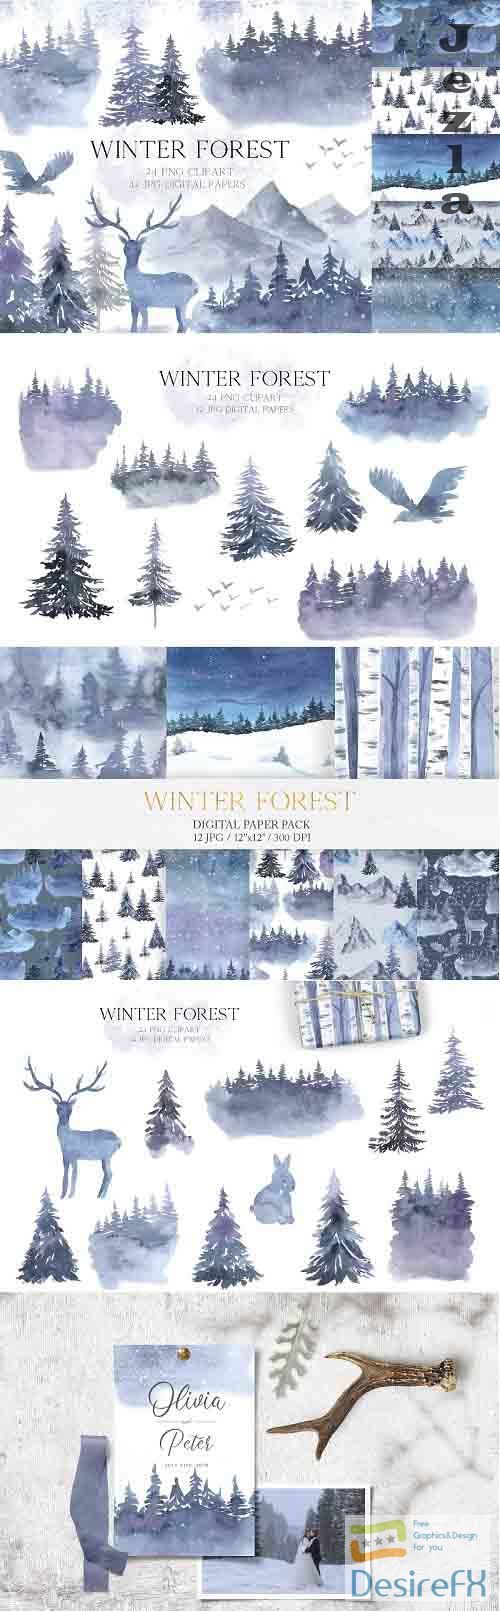 Watercolor Winter Forest Set - 5633566